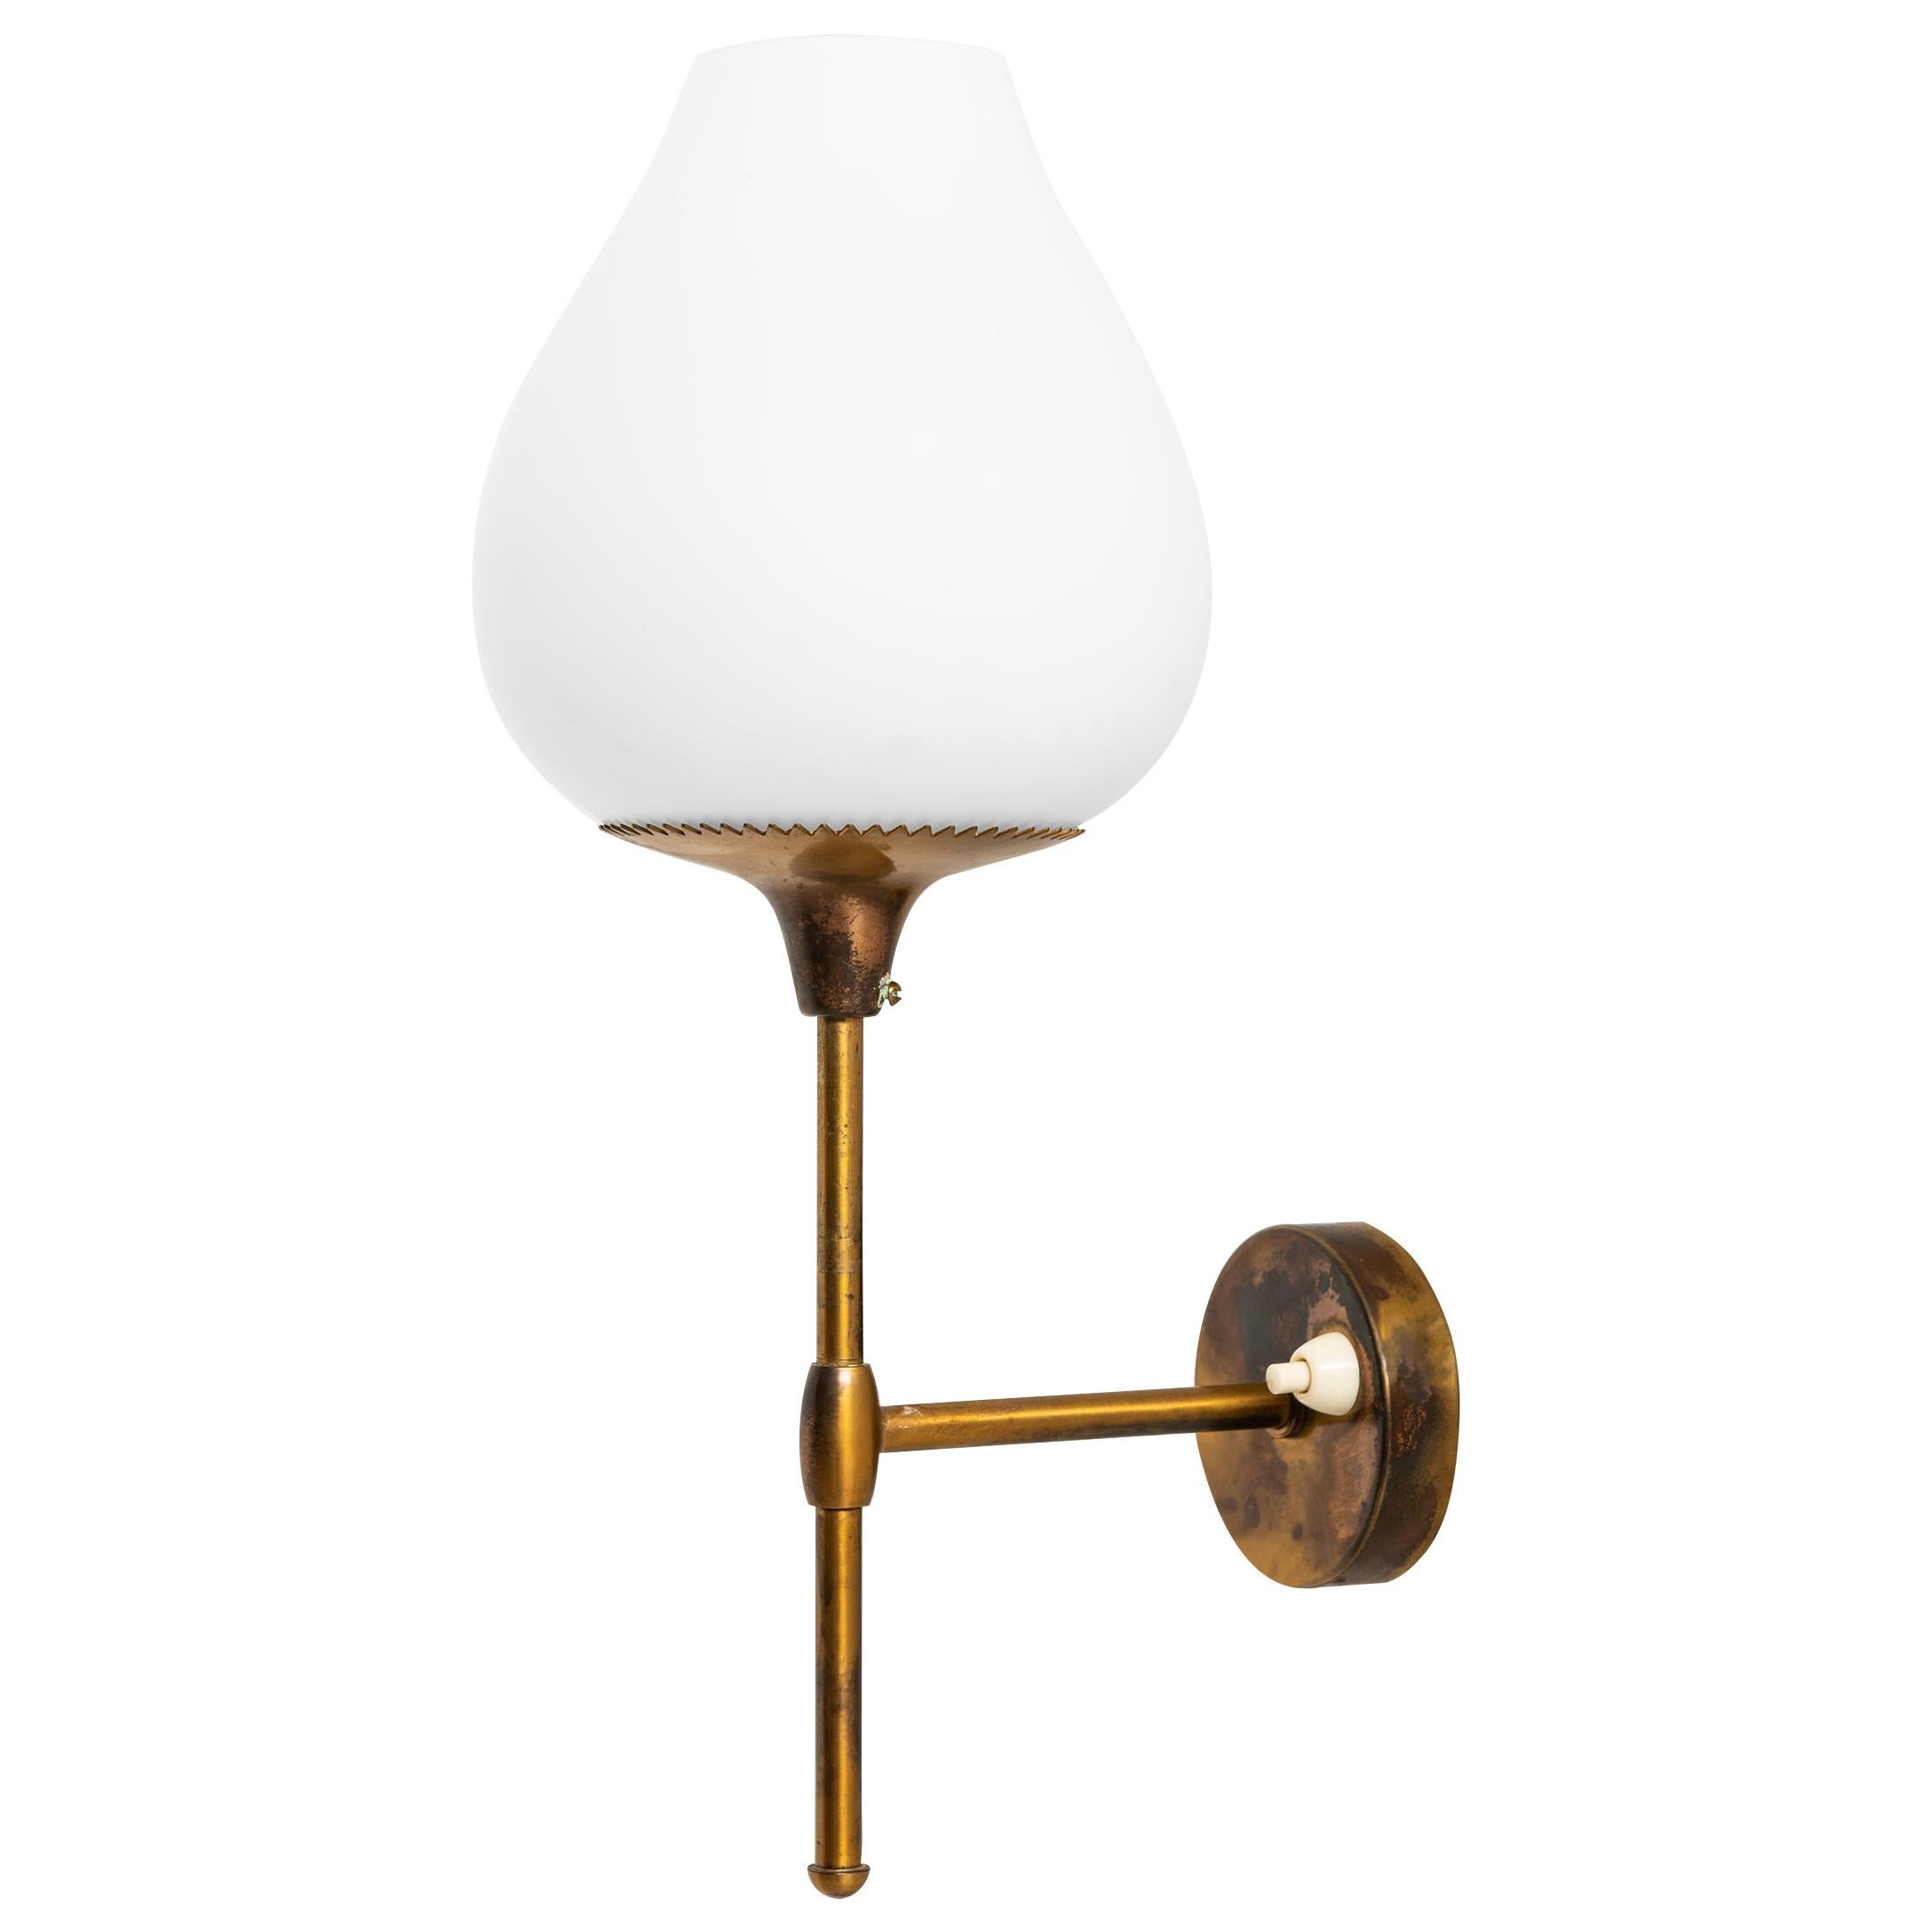 Alf Svensson Wall Lamps Produced by Bergboms in Sweden